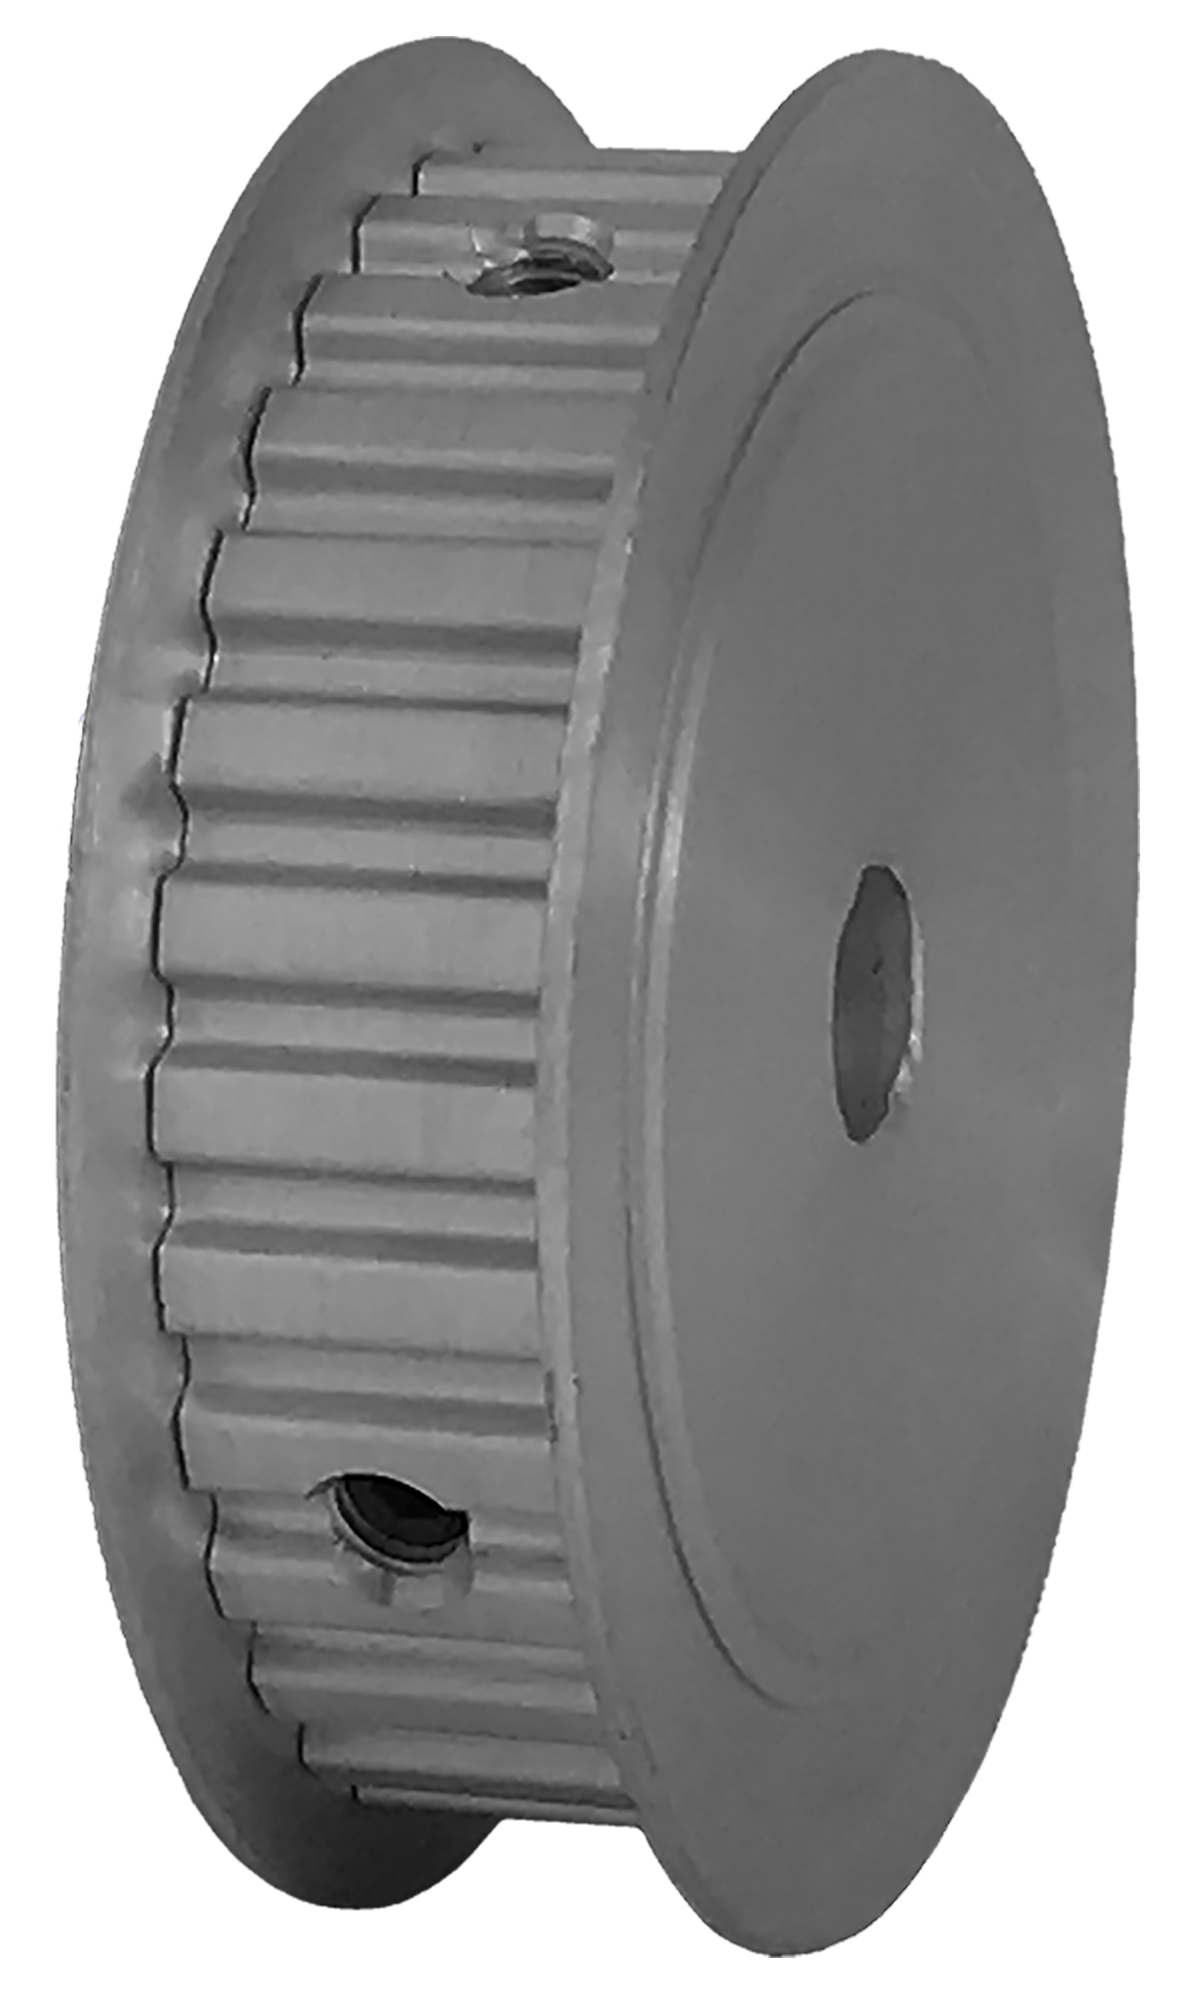 30XL037-3FA4 - Aluminum Imperial Pitch Pulleys